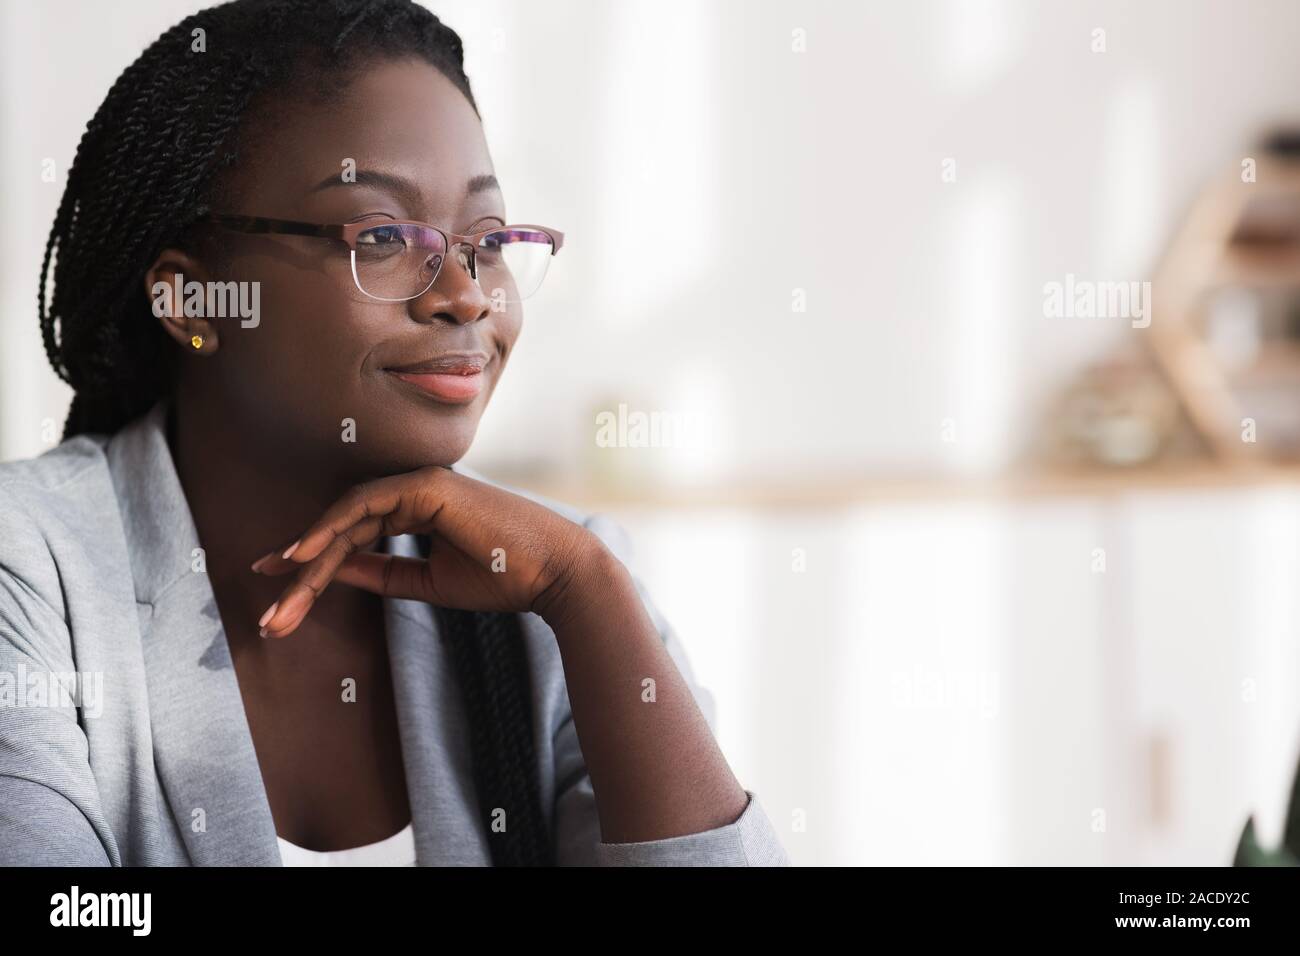 Closeup portrait of confident african american businesswoman in glasses Stock Photo